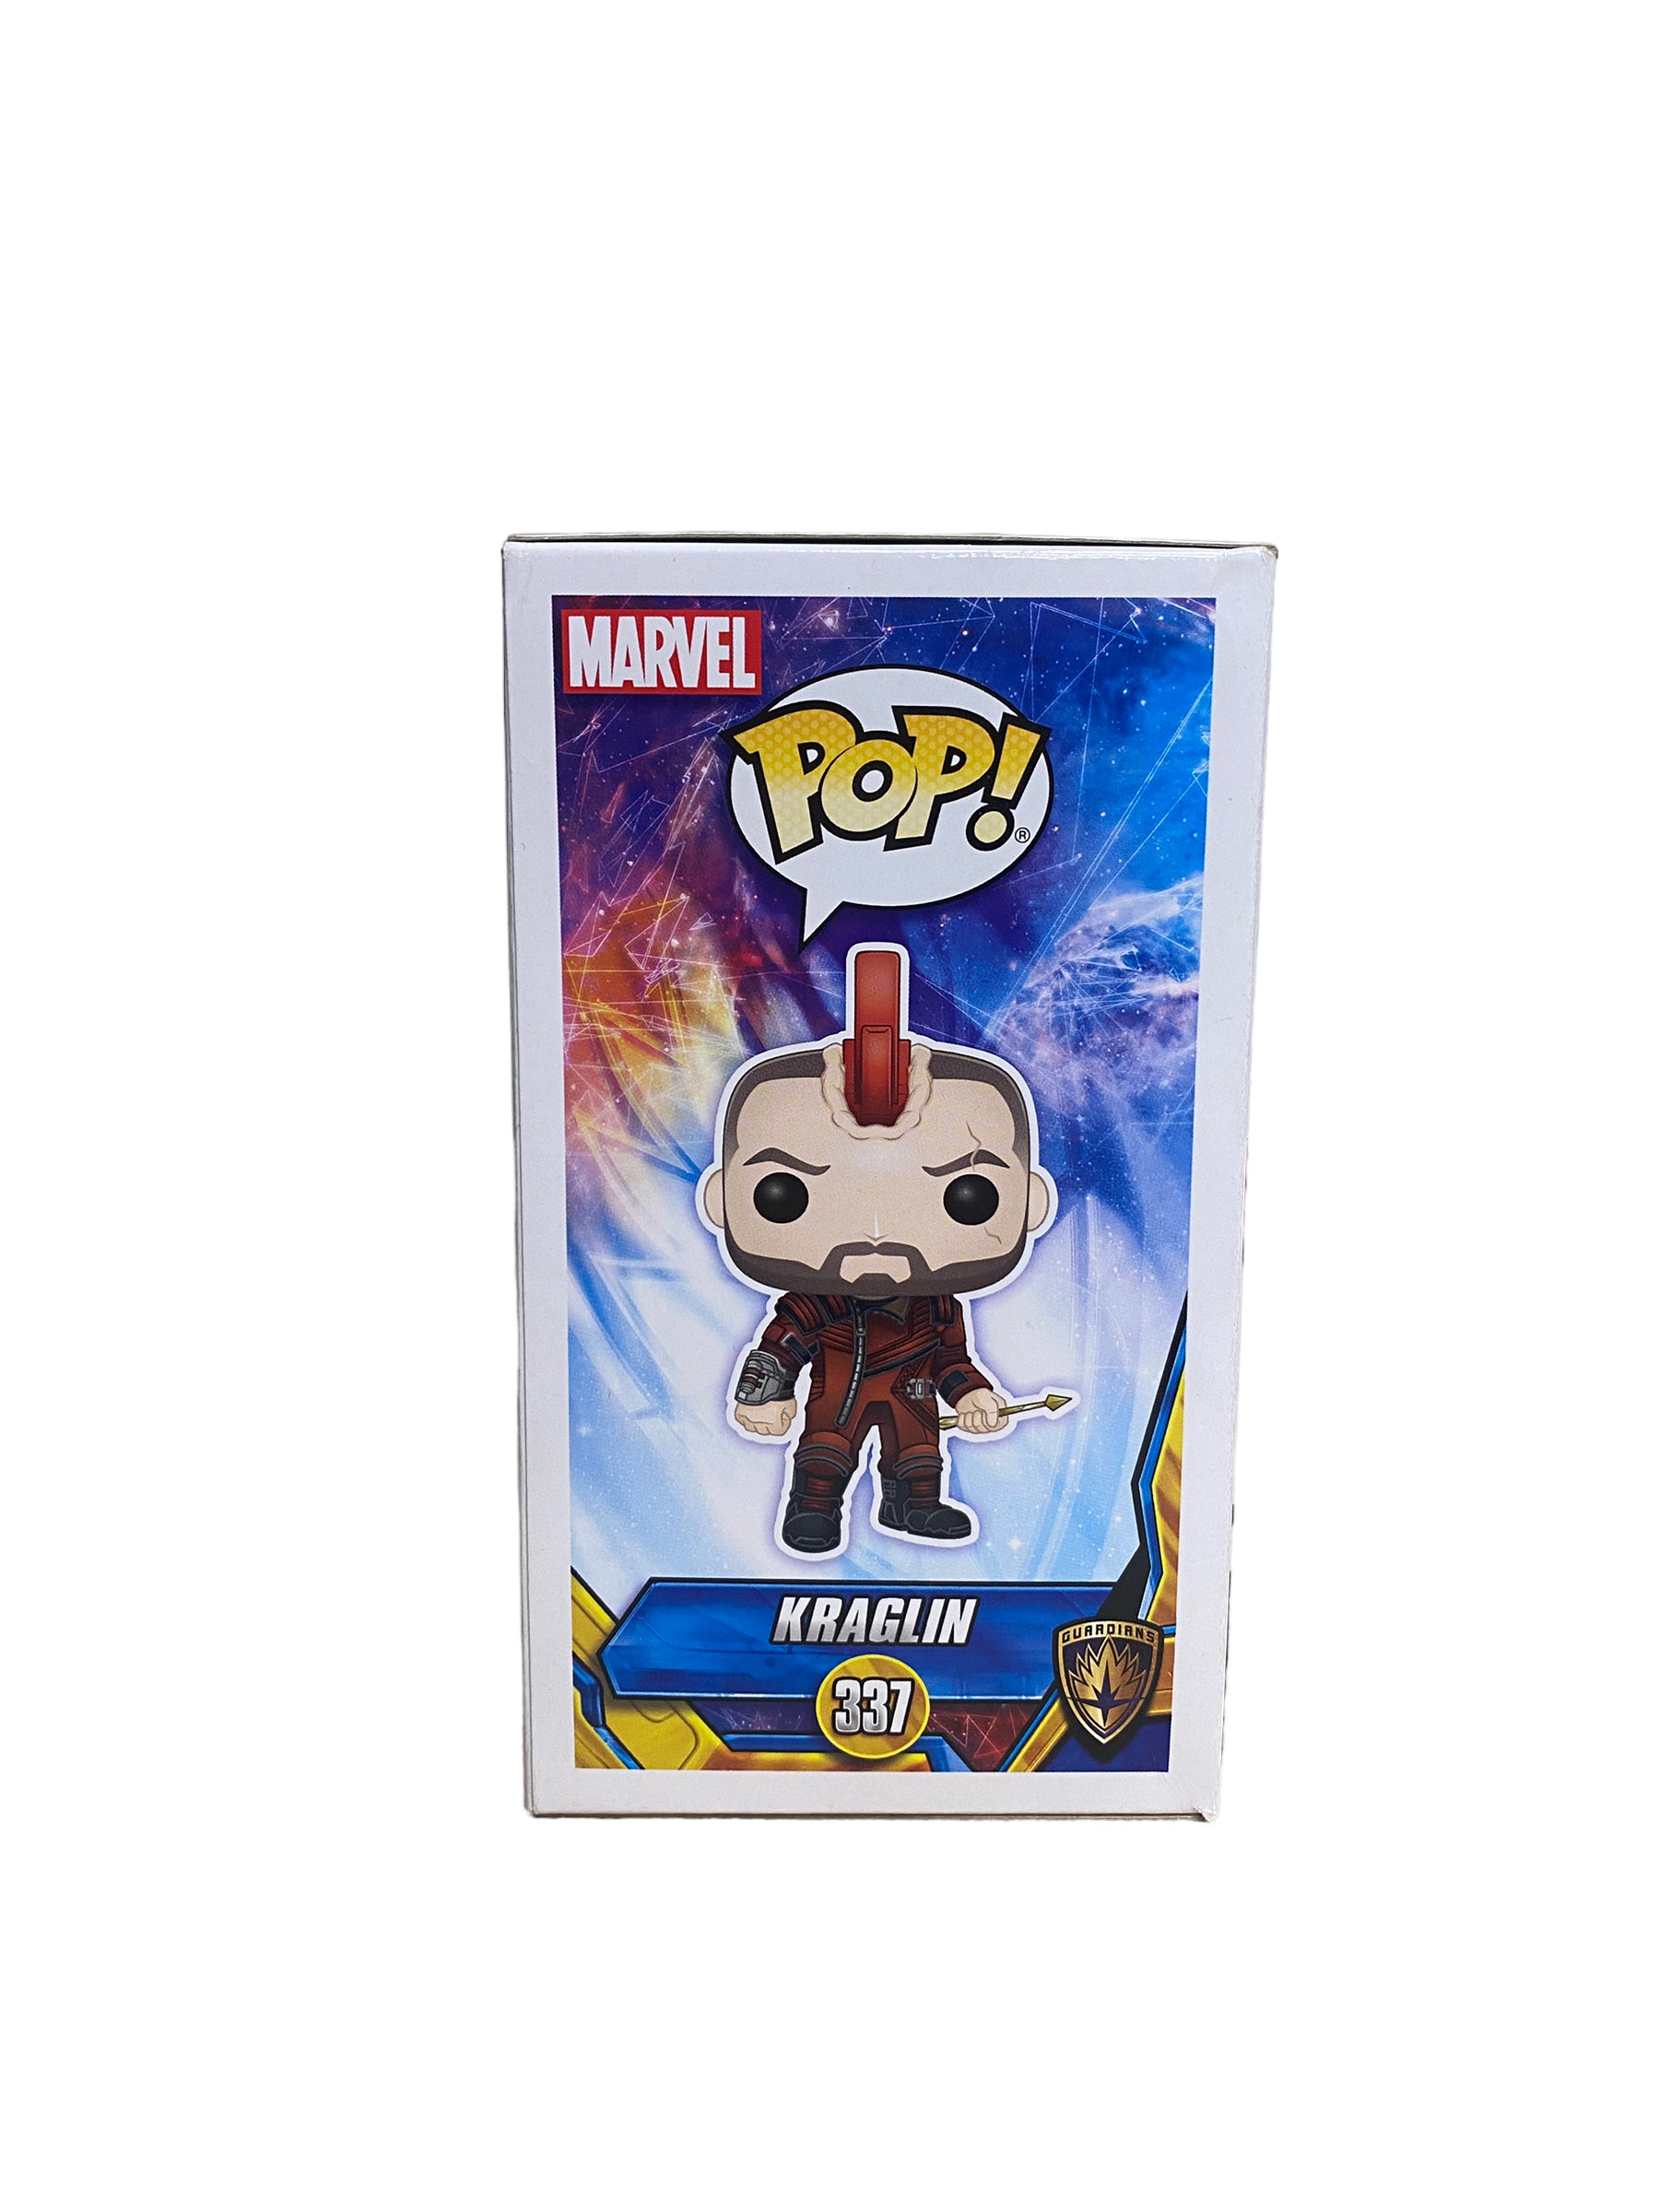 Kraglin #337 Funko Pop! - Guardians Of The Galaxy Vol.2 - SDCC 2018 Official Convention Exclusive - Condition 7.5/10